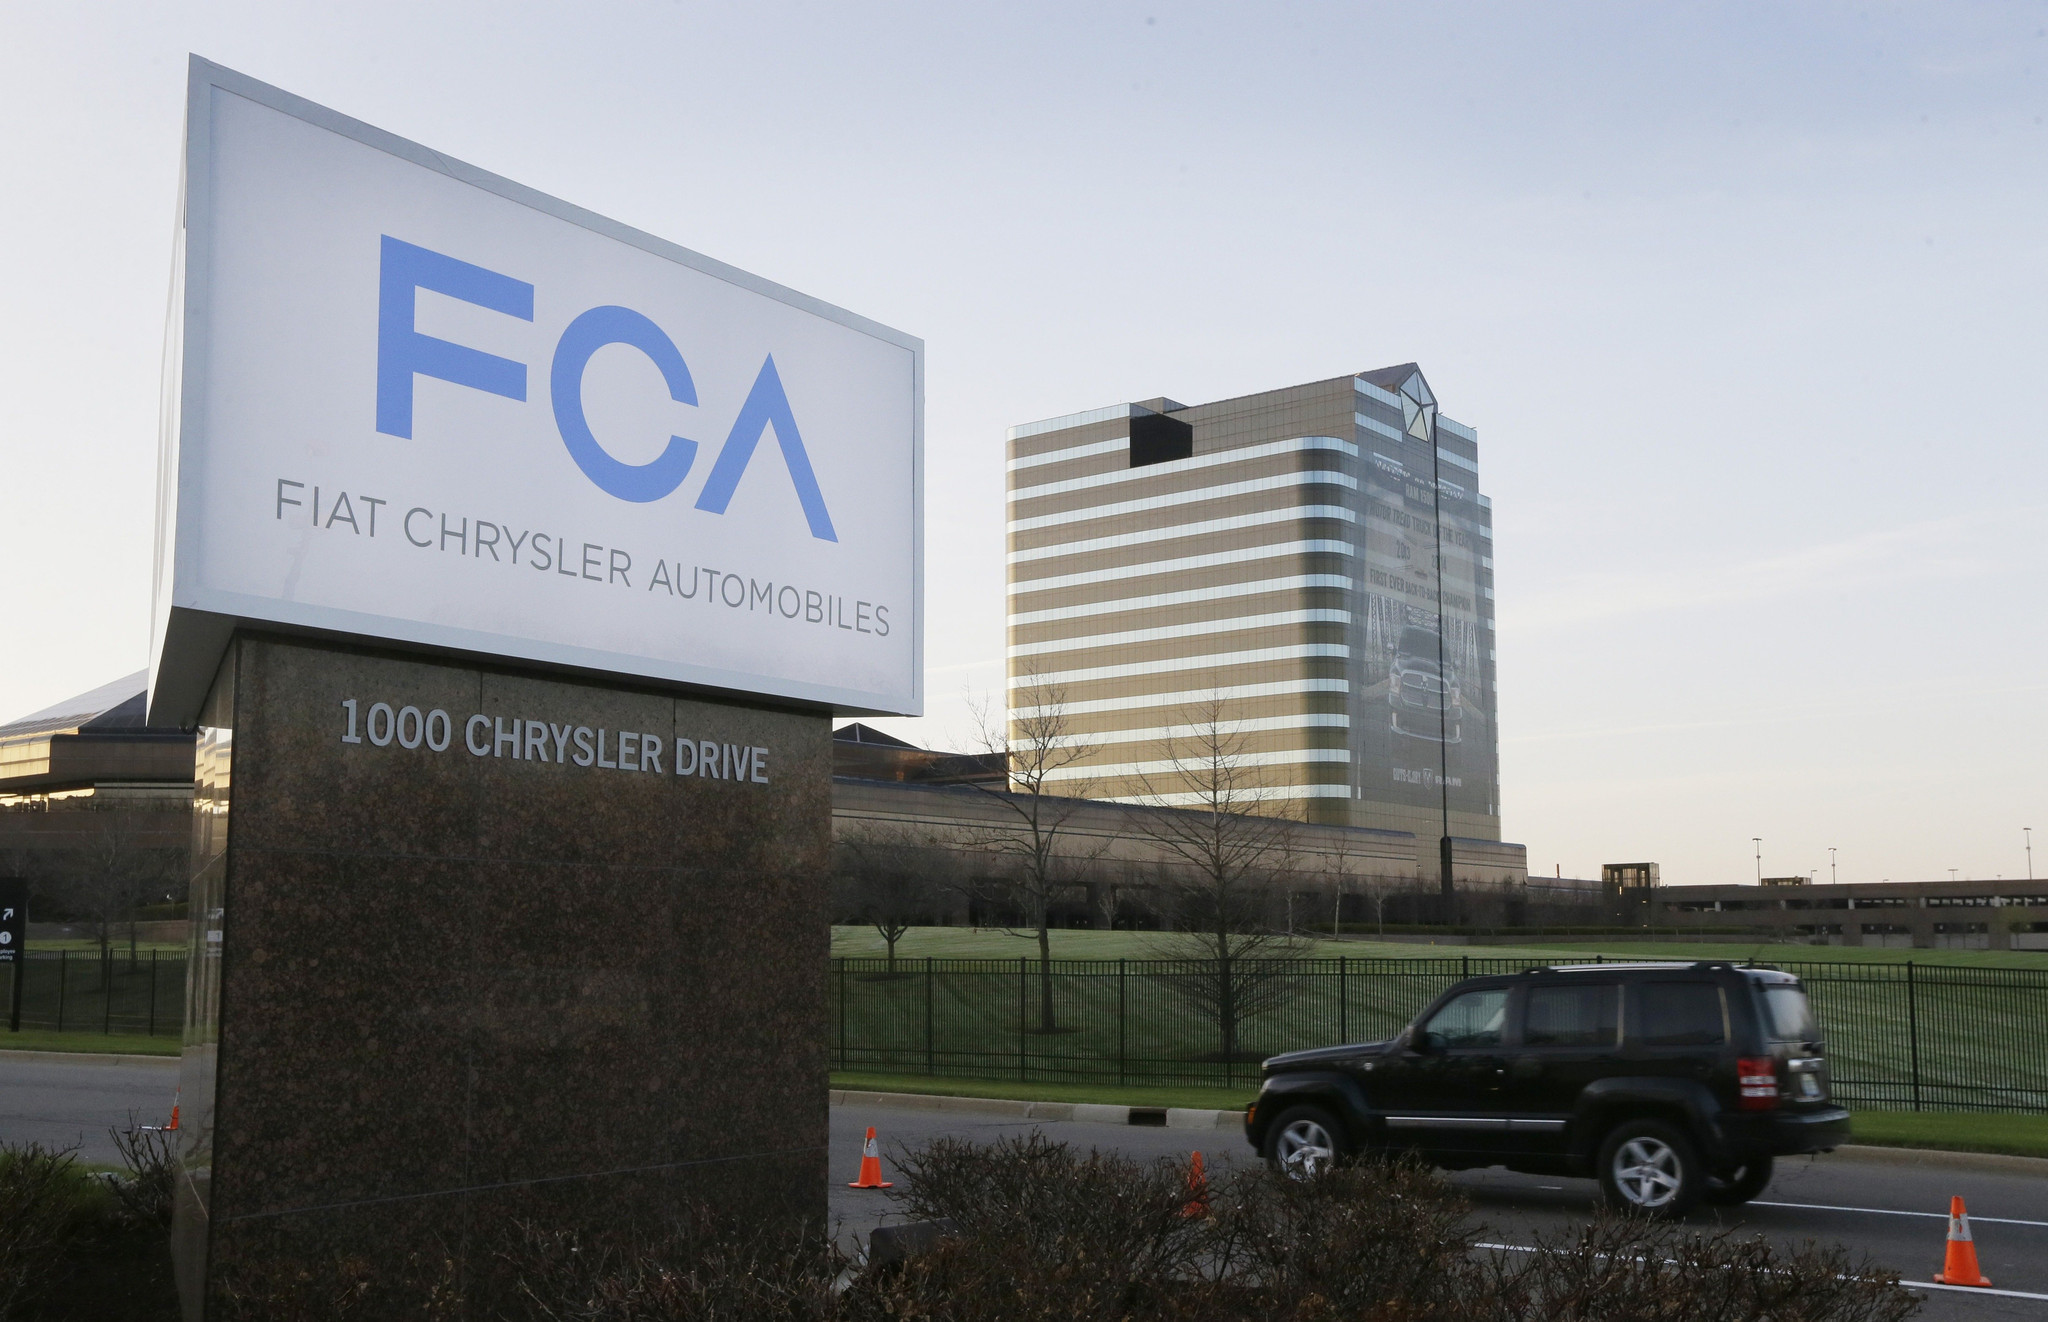 With record Fiat Chrysler fine, safety regulators get more aggressive - Los Angeles Times